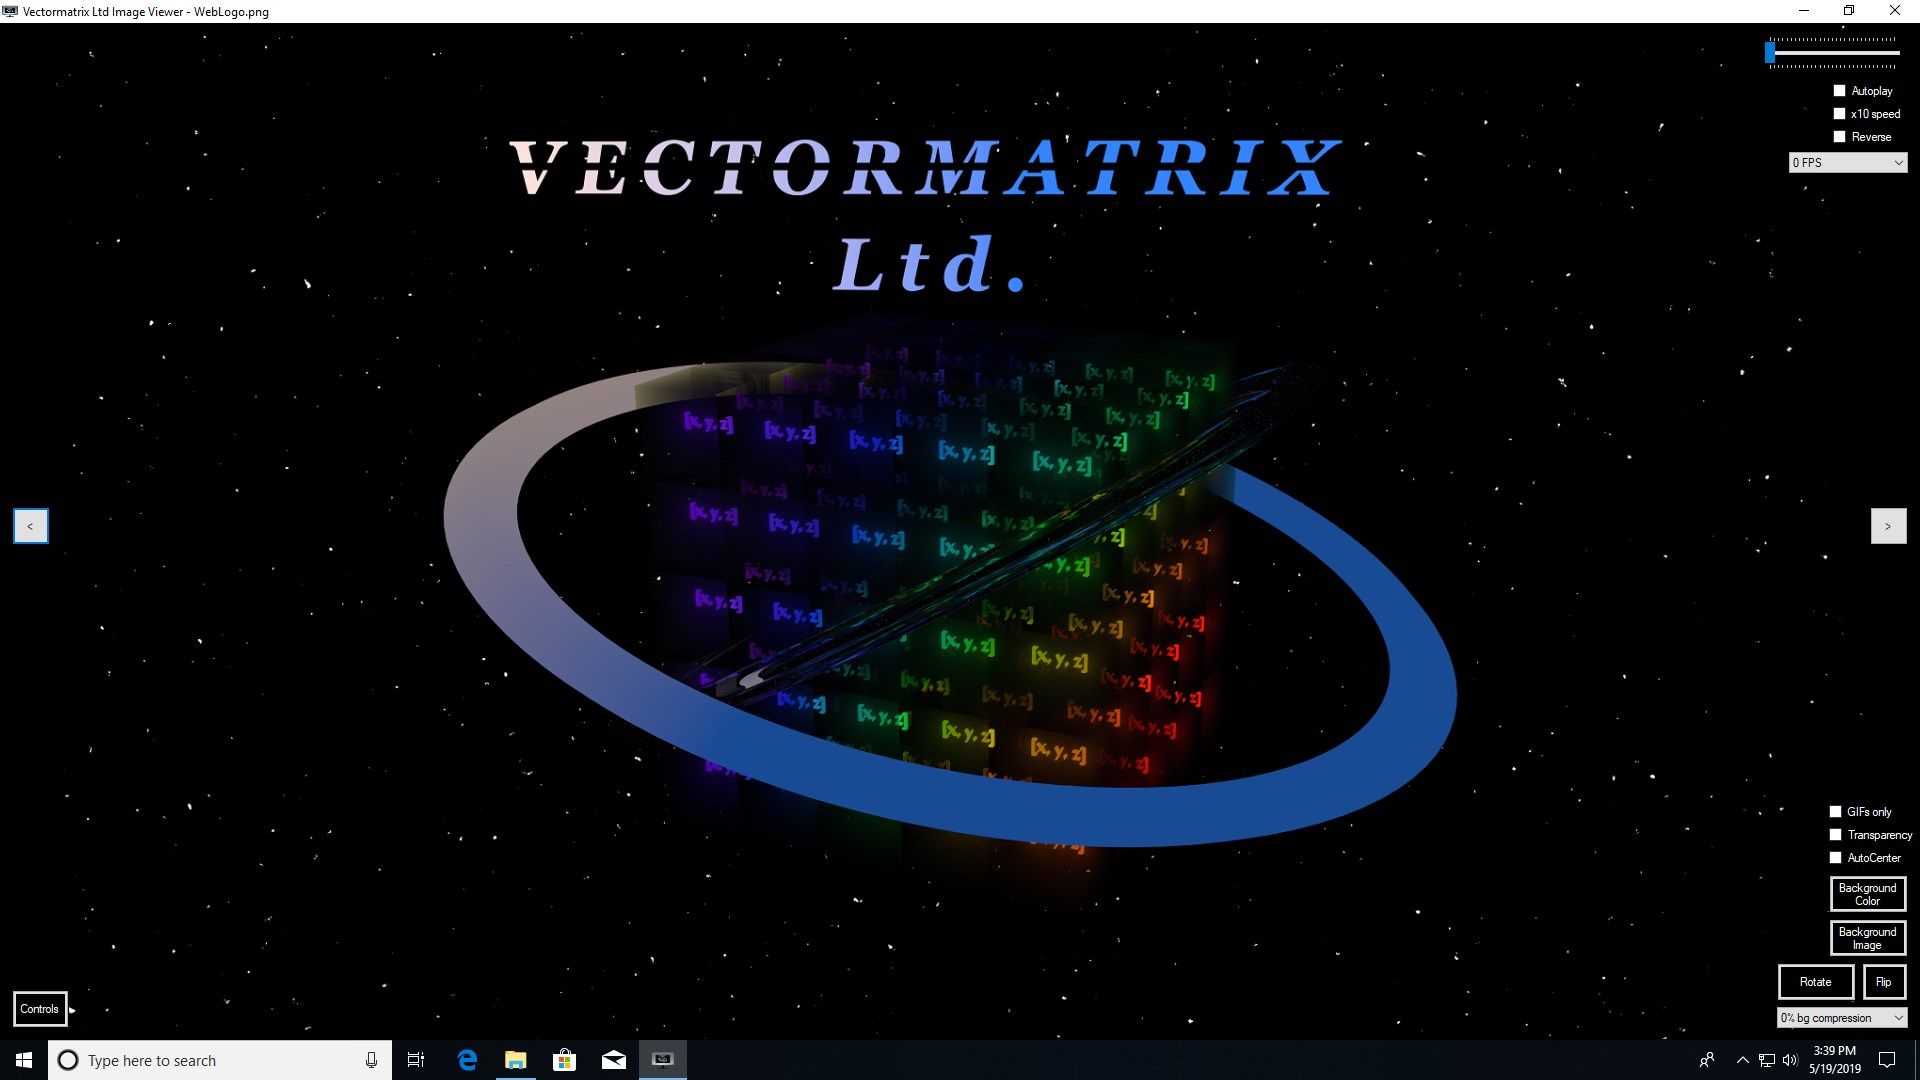 Associate your images files with Vectormatrix Ltd Image Viewer to open them directly in a clear and fast interface. No more waiting for your images to load, Vectormatrix Ltd Image Viewer opens images rapidly!